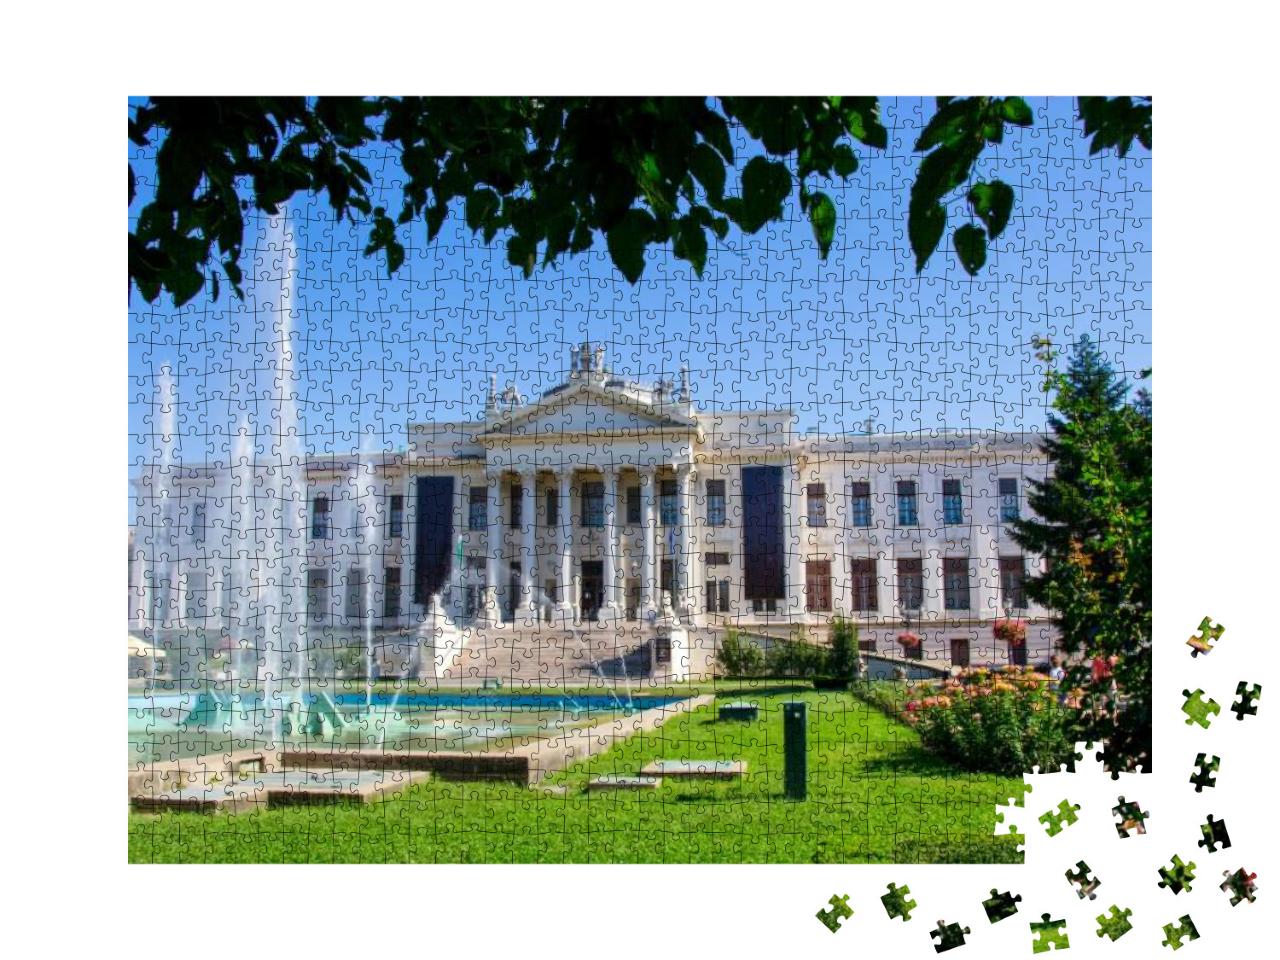 The Beautiful Blossoming Rose Garden, the Water Splashes... Jigsaw Puzzle with 1000 pieces